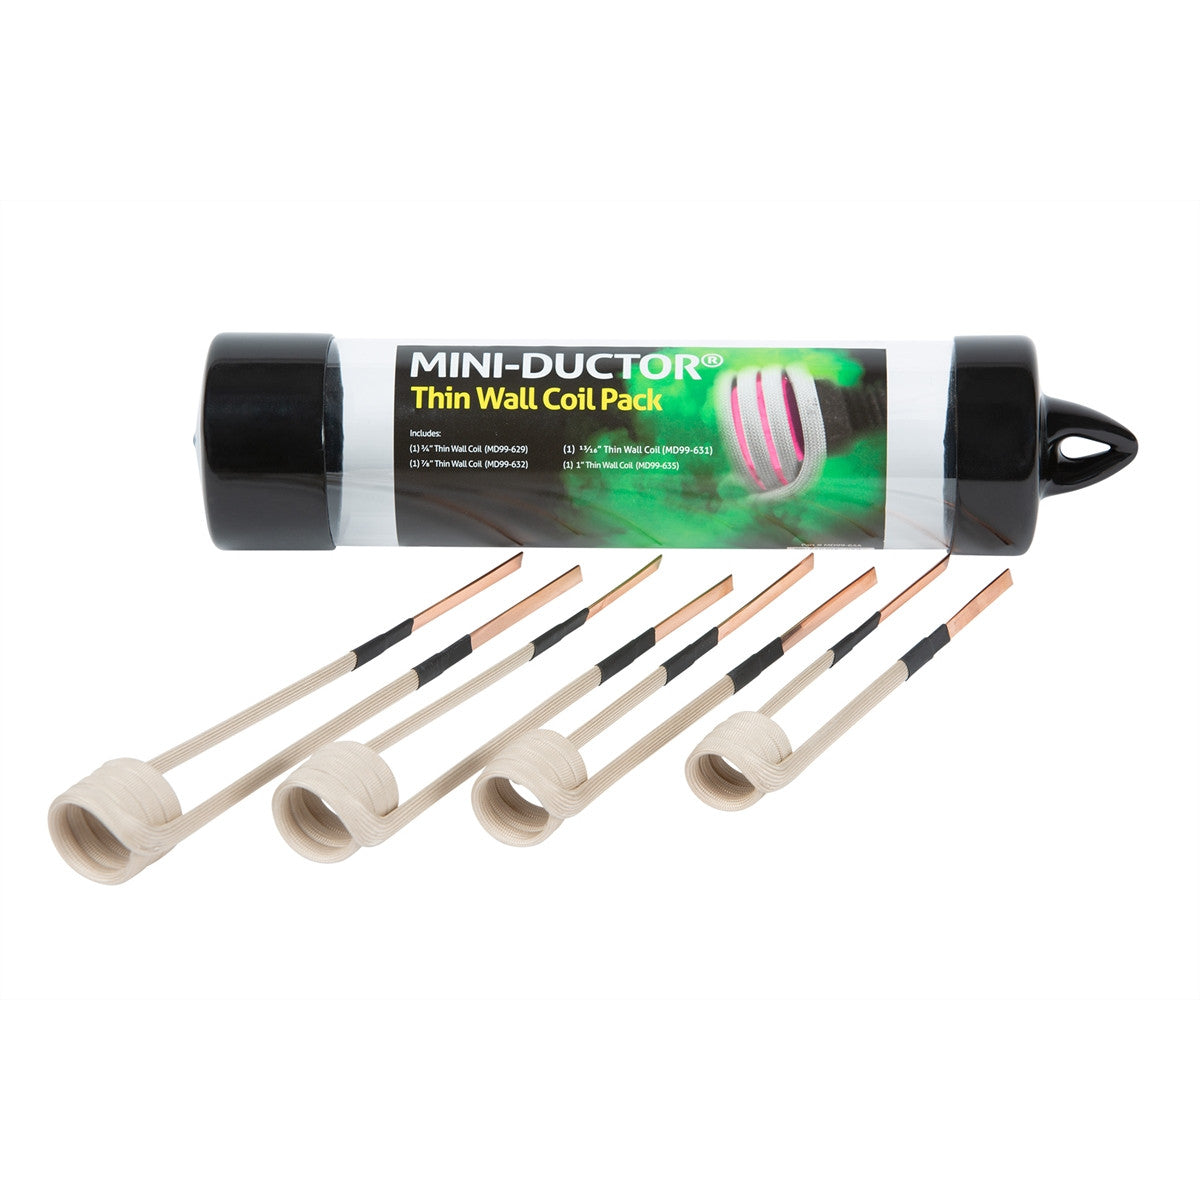 Induction Innovations MD99-644 Mini-Ductor® Thin Wall Coil Pack - MPR Tools & Equipment